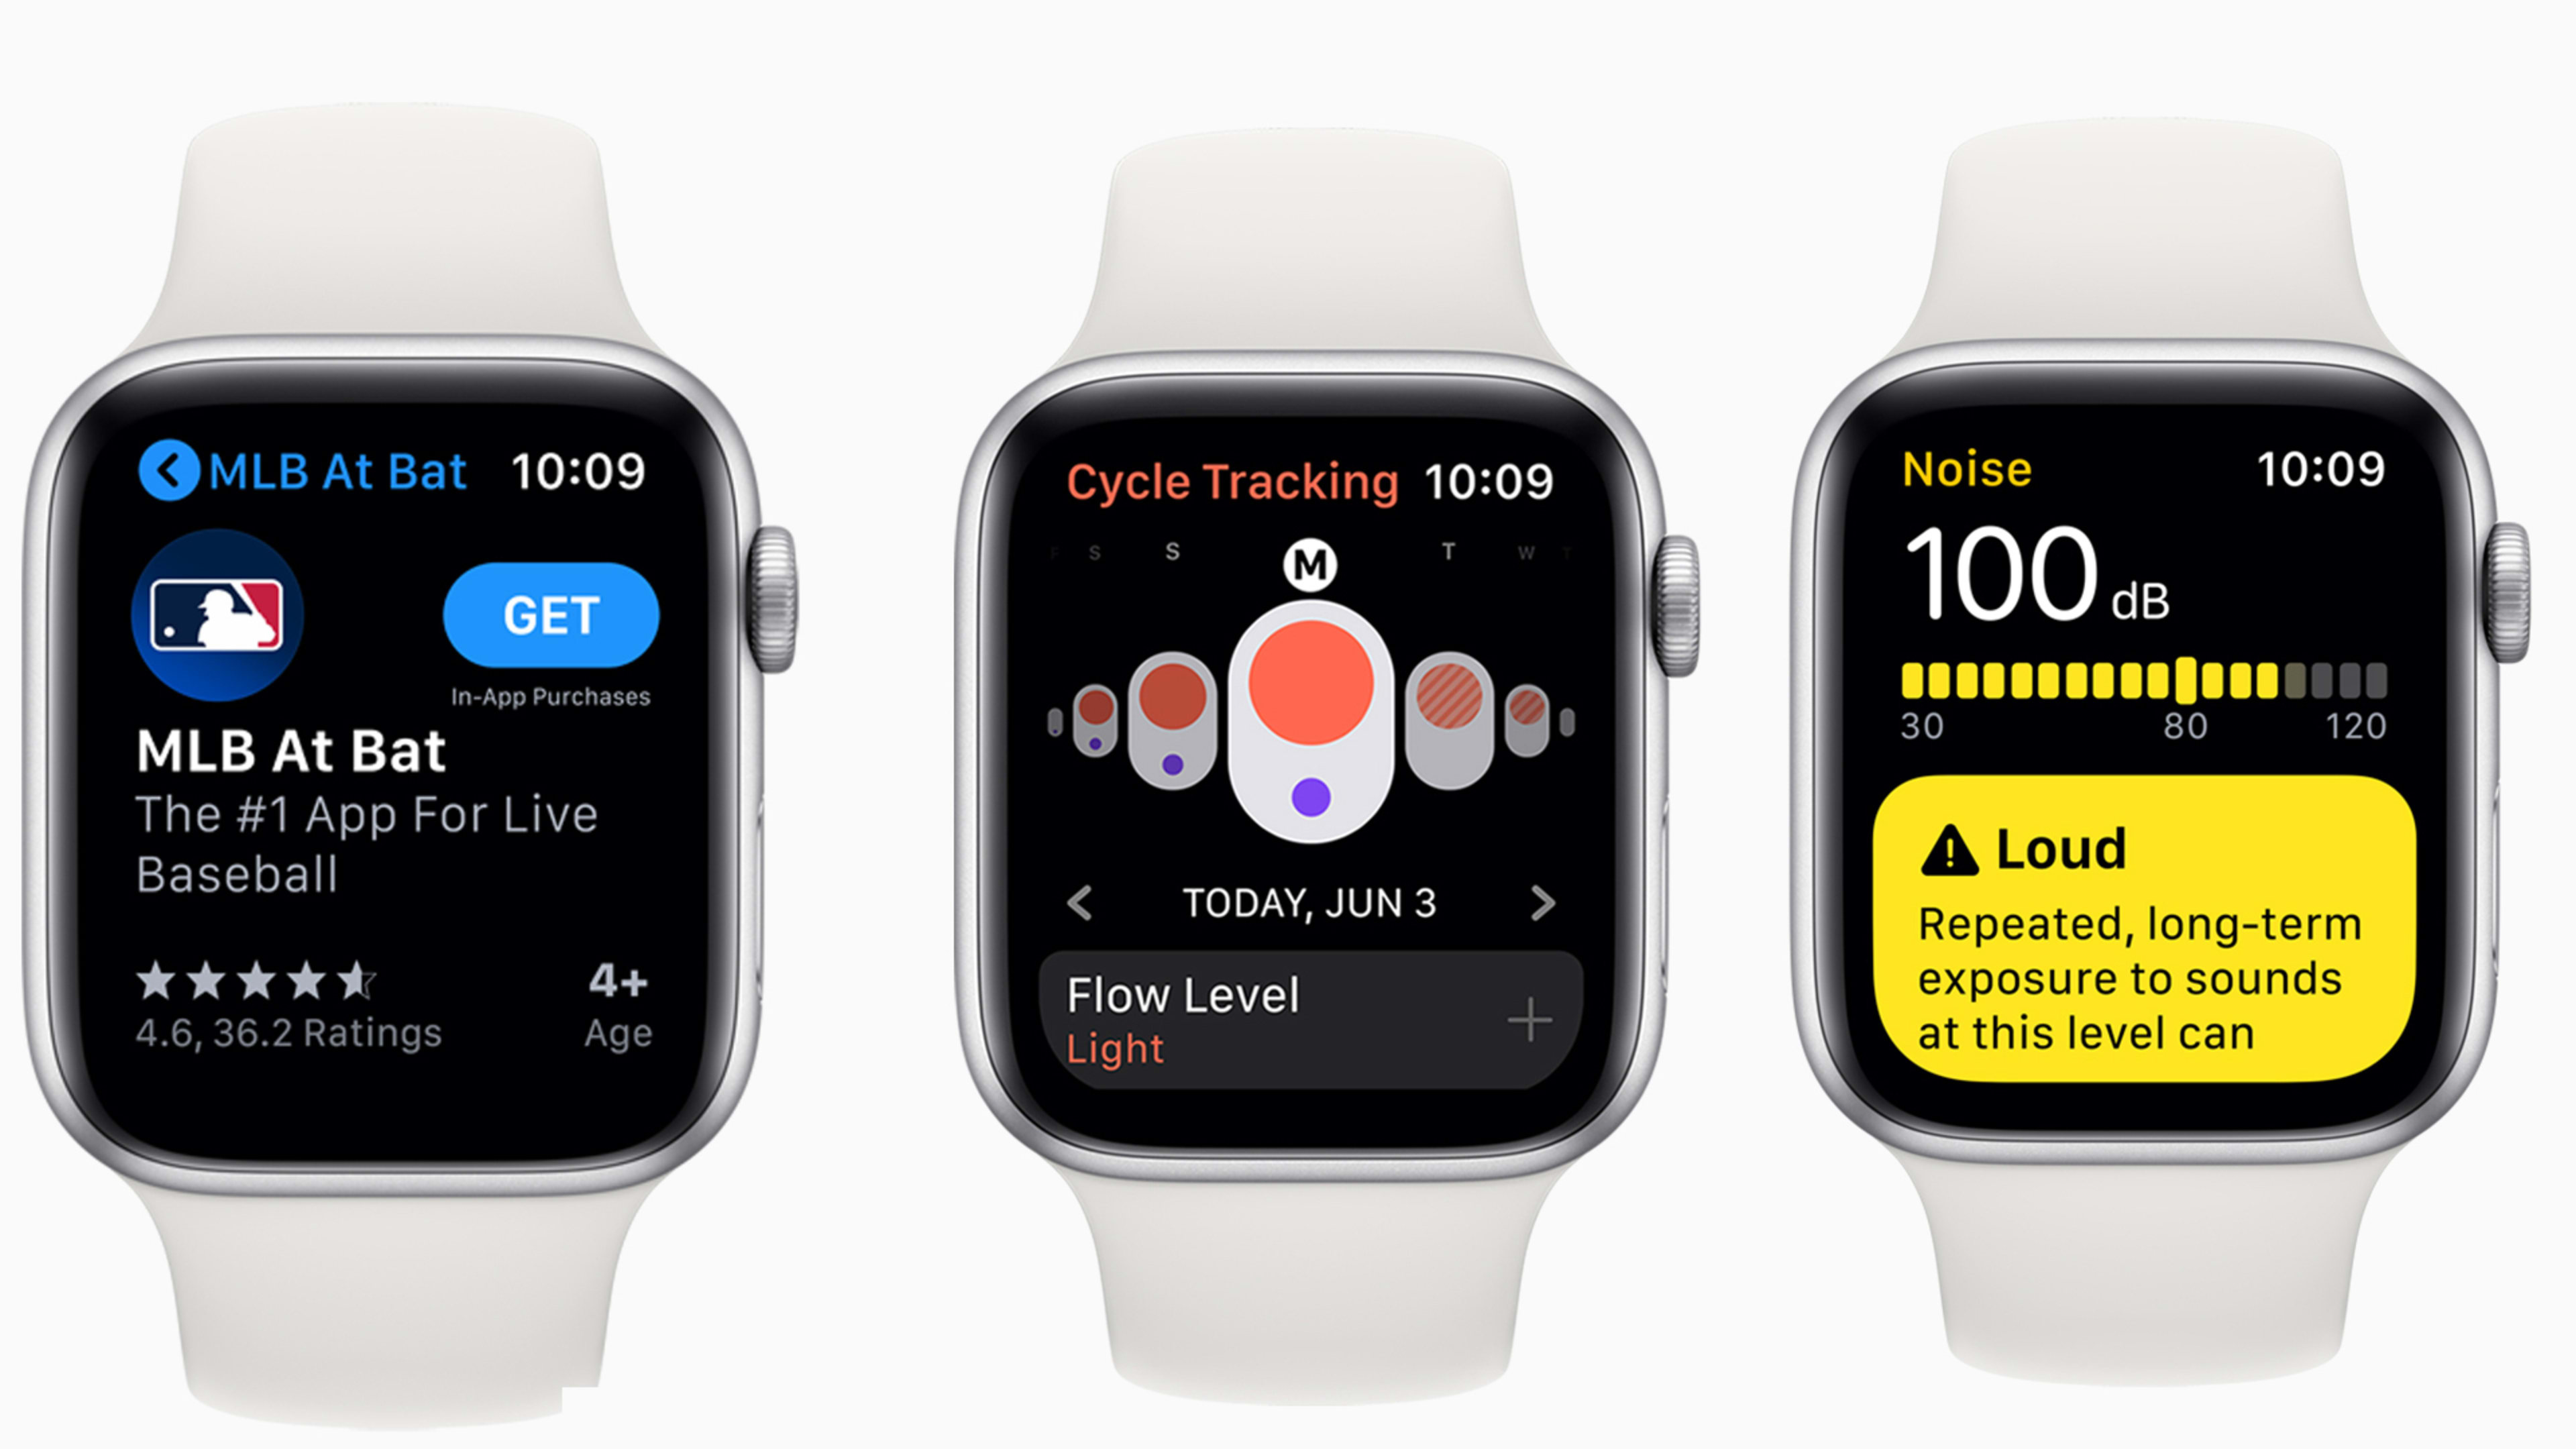 Apple Watch gets its own app store and new apps with watchOS 6